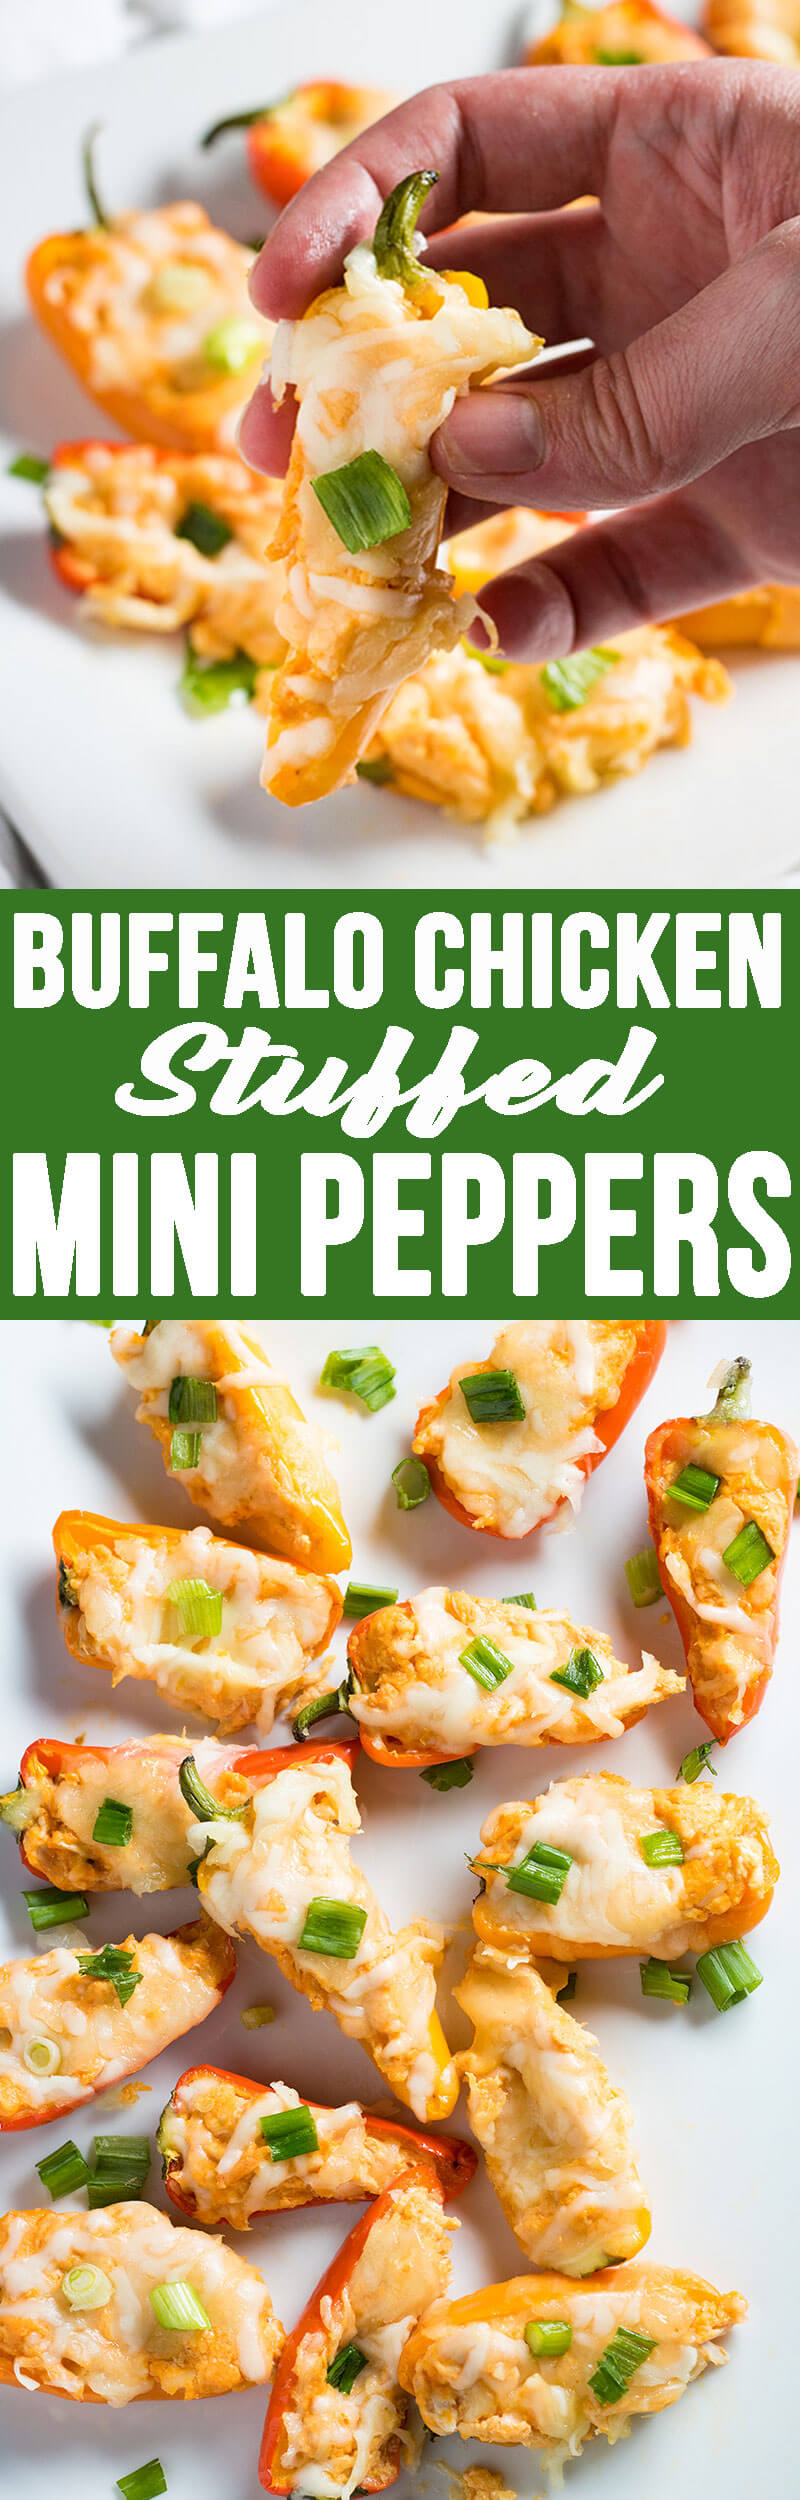 Buffalo Chicken Stuffed Mini Peppers make for an excellent appetizer, especially during football season